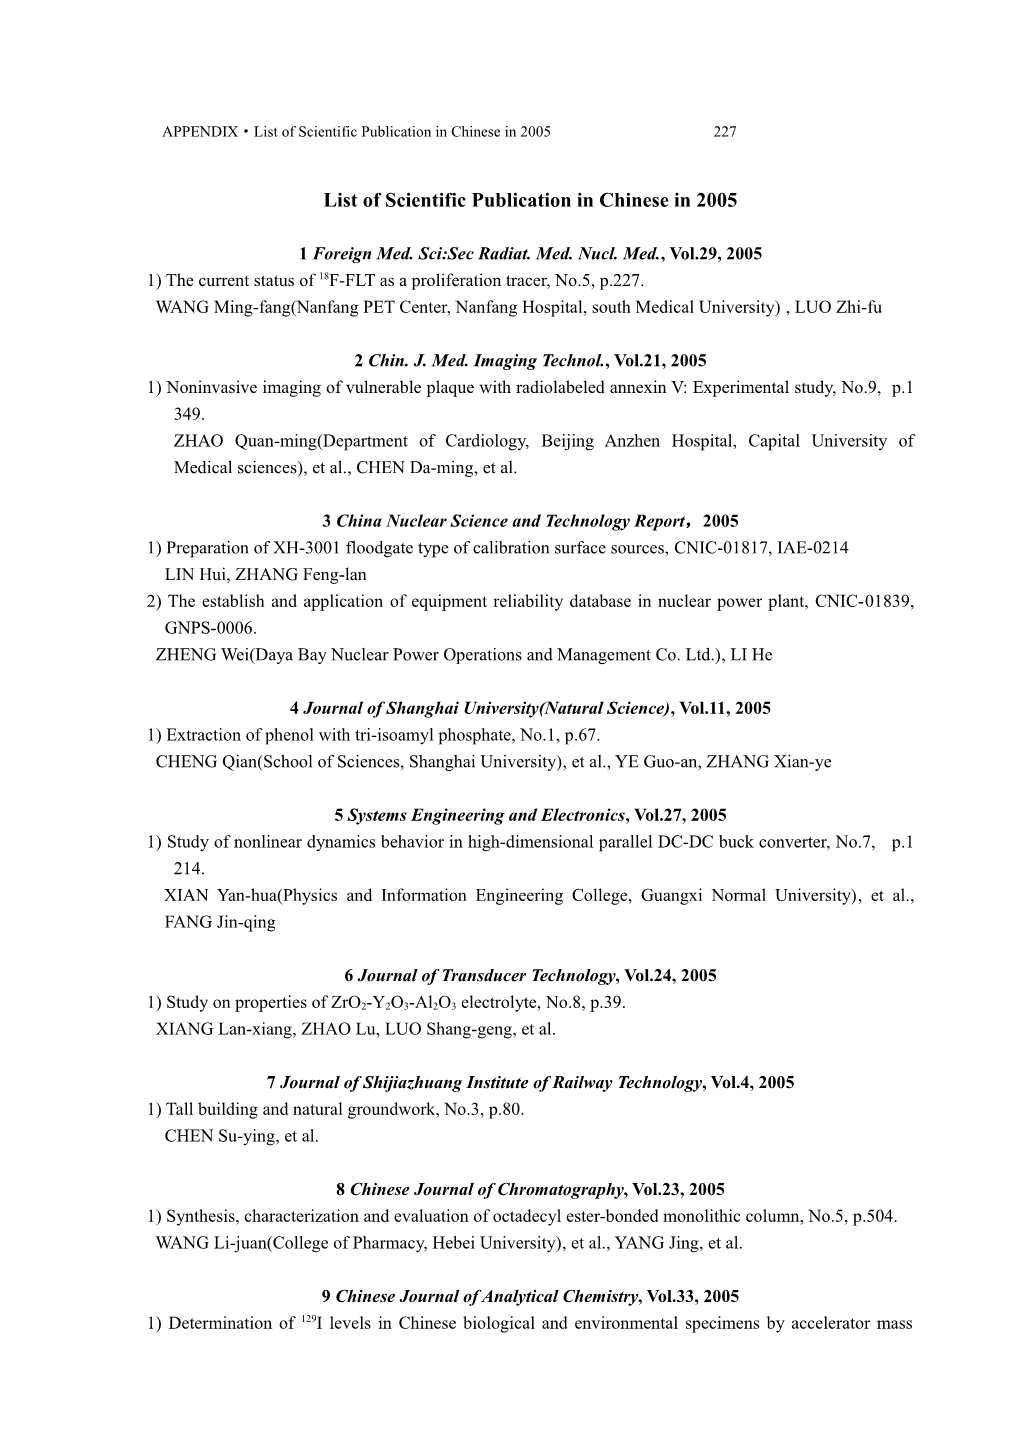 List of Scientific Publication in Chinese in 2005